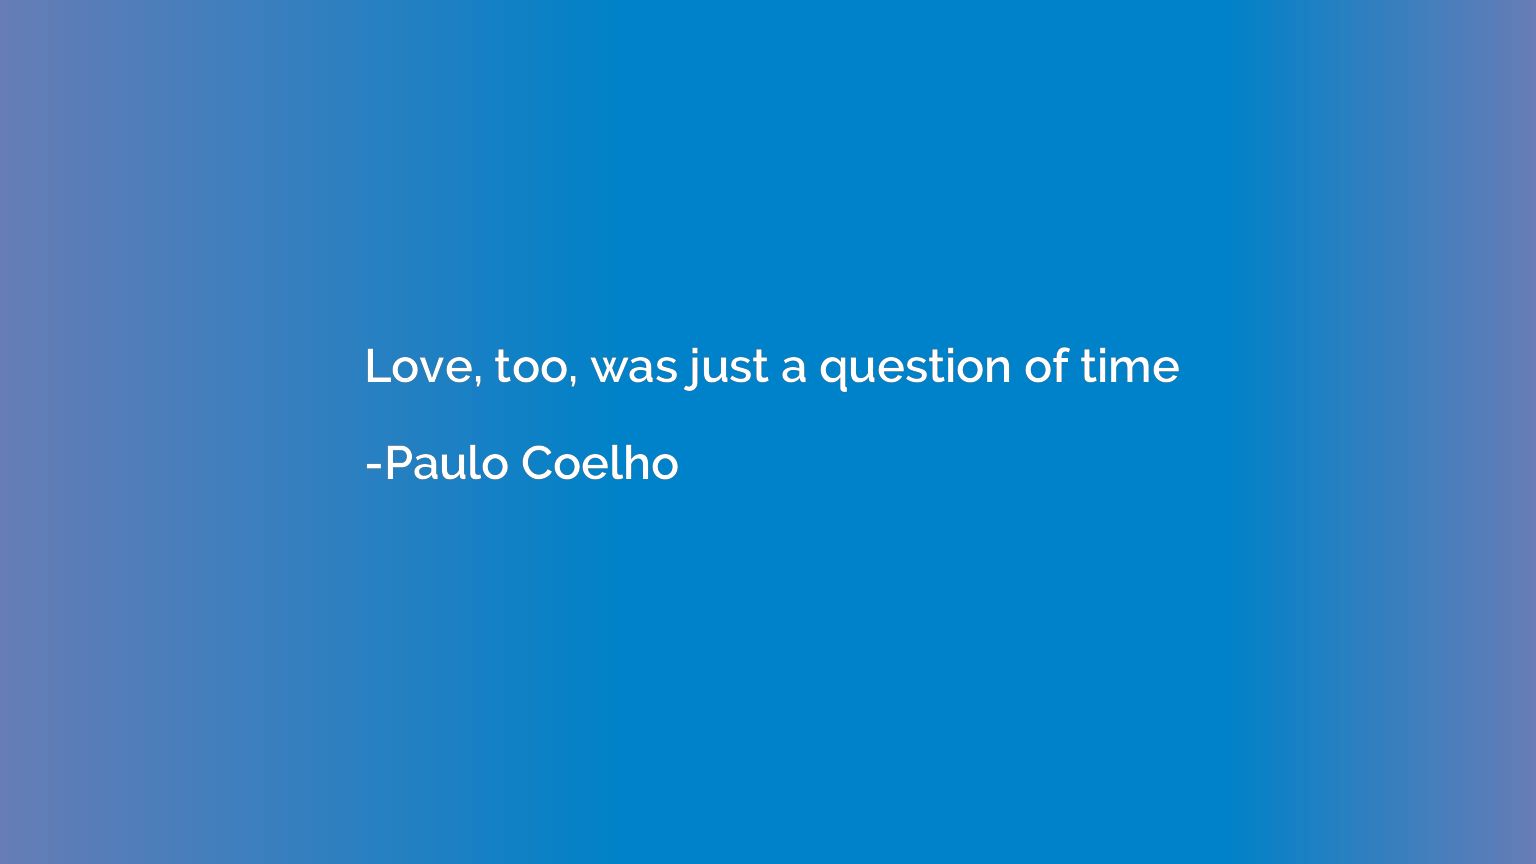 Love, too, was just a question of time